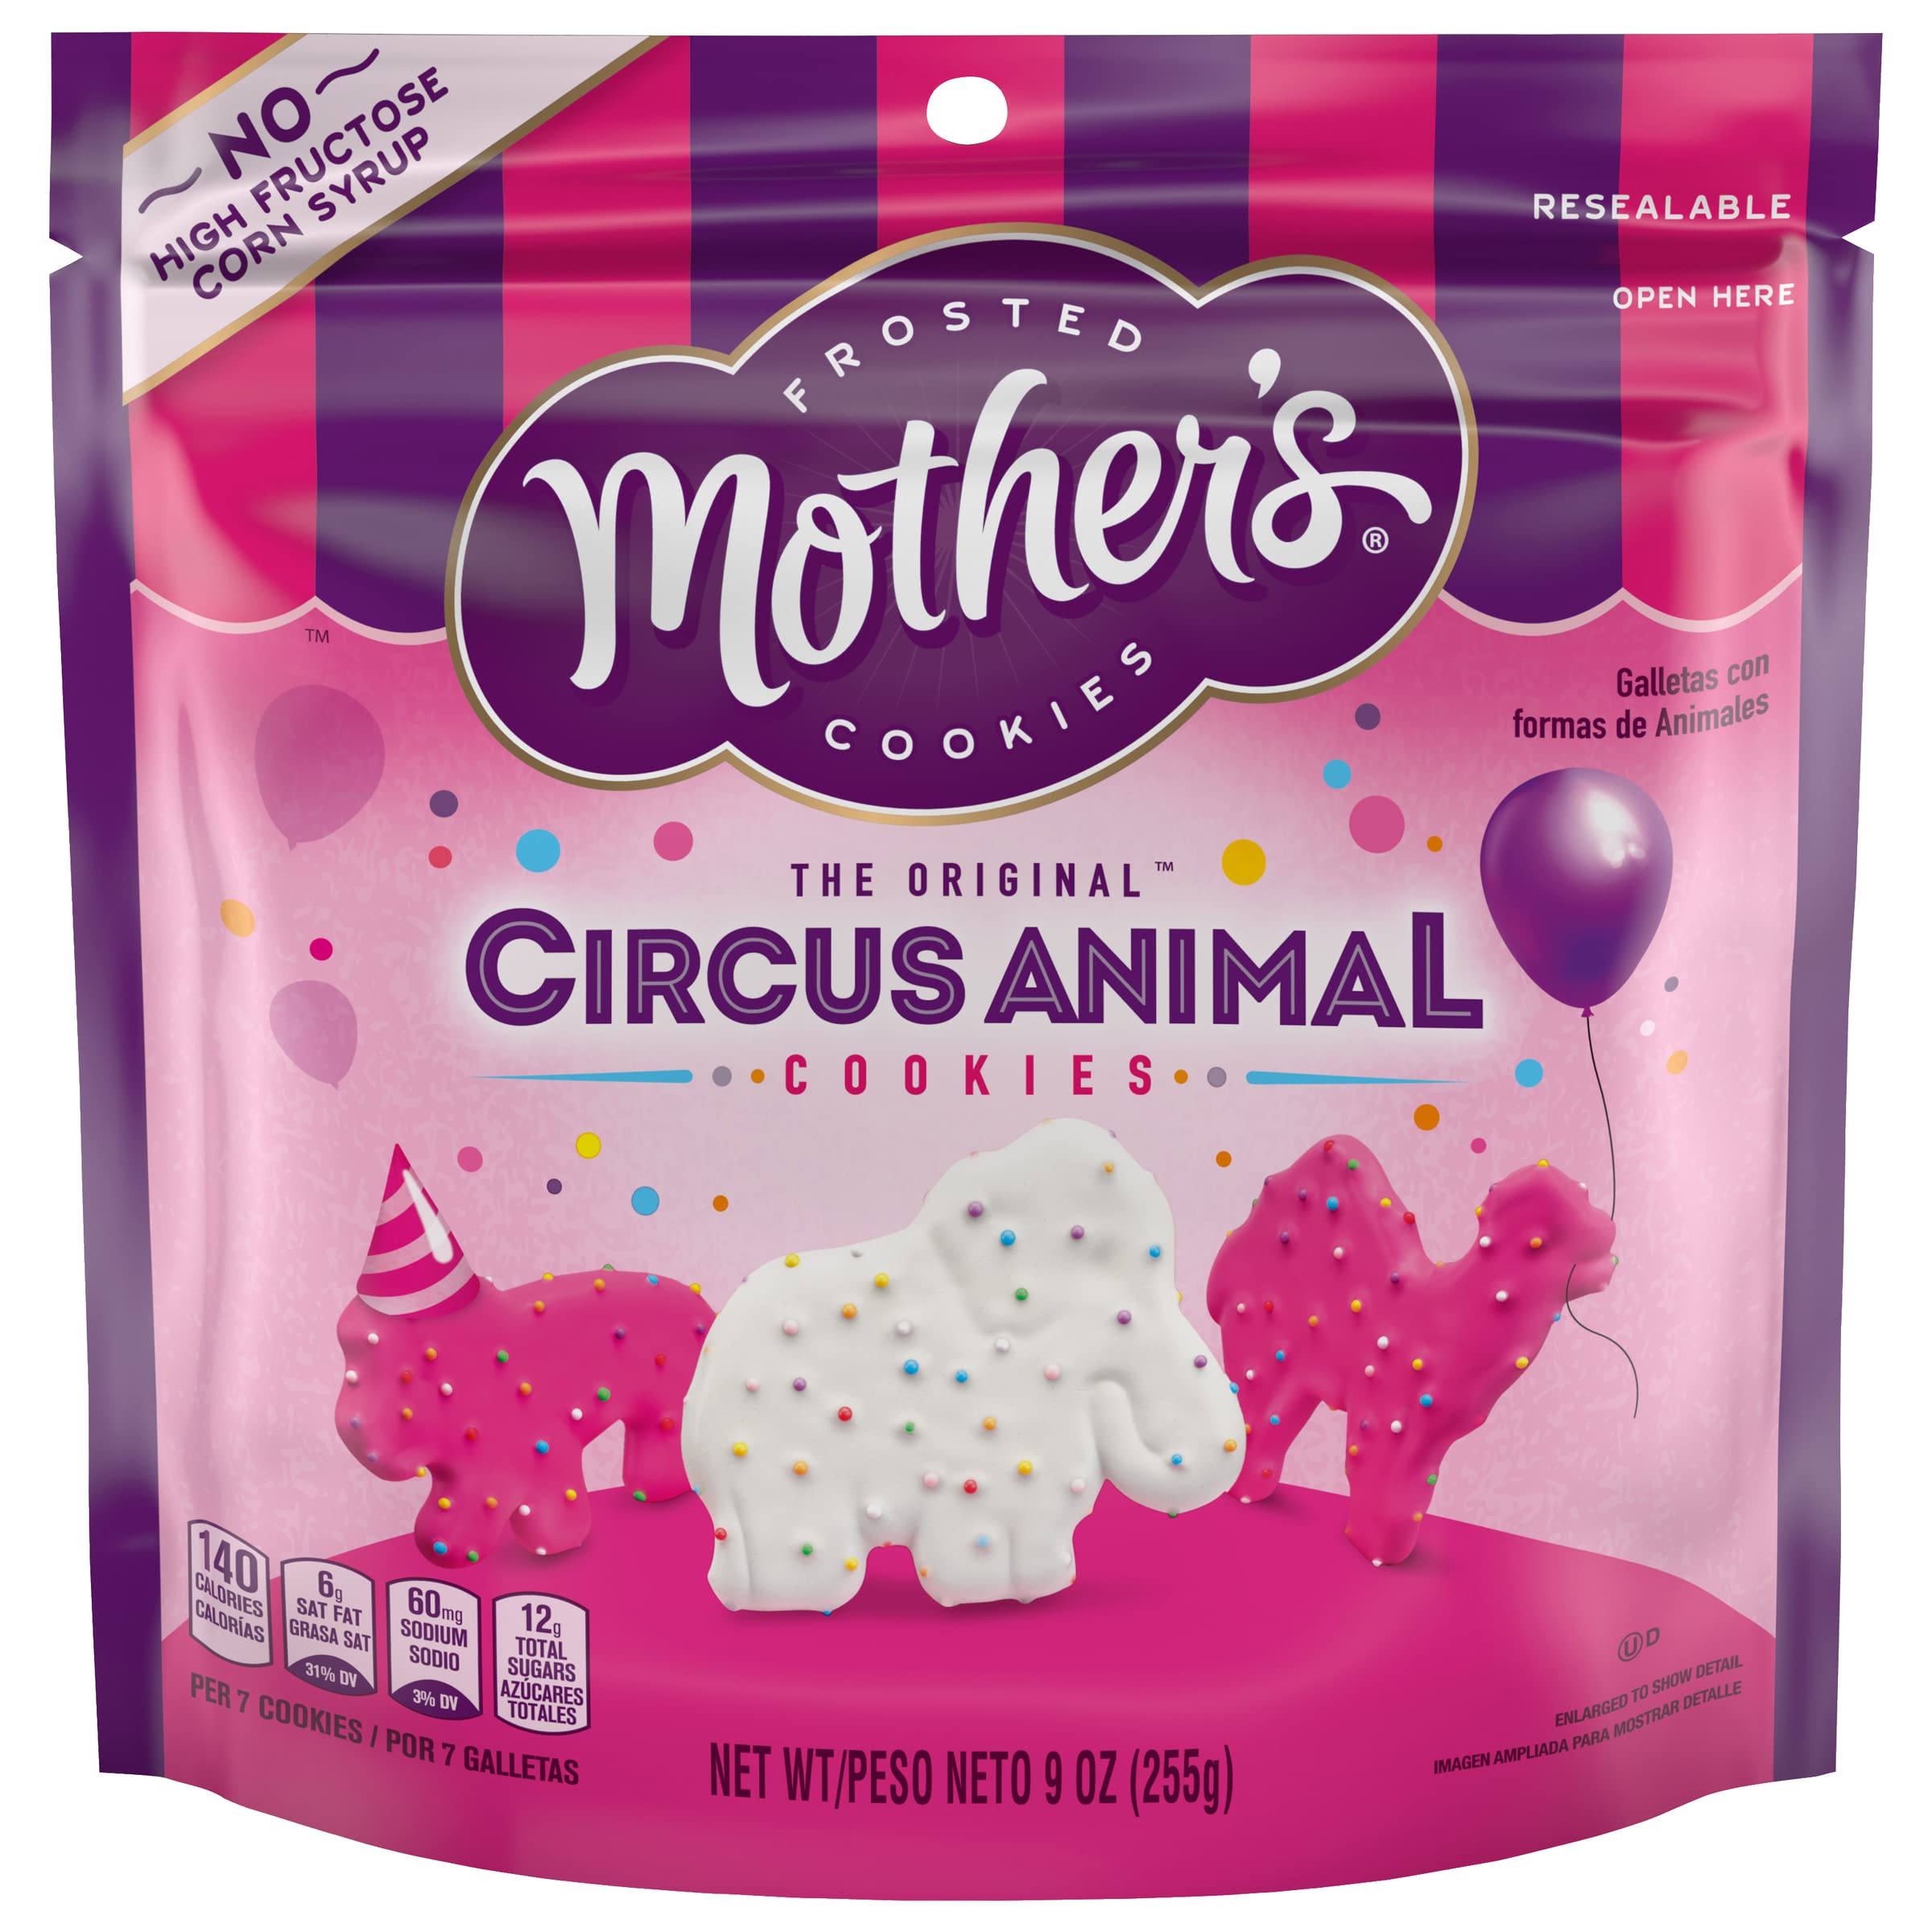 Mother's Circus Animal Cookies, 9 Oz. (Pack of 1) : $2.74 as low as $2.40 S&S 5+ items